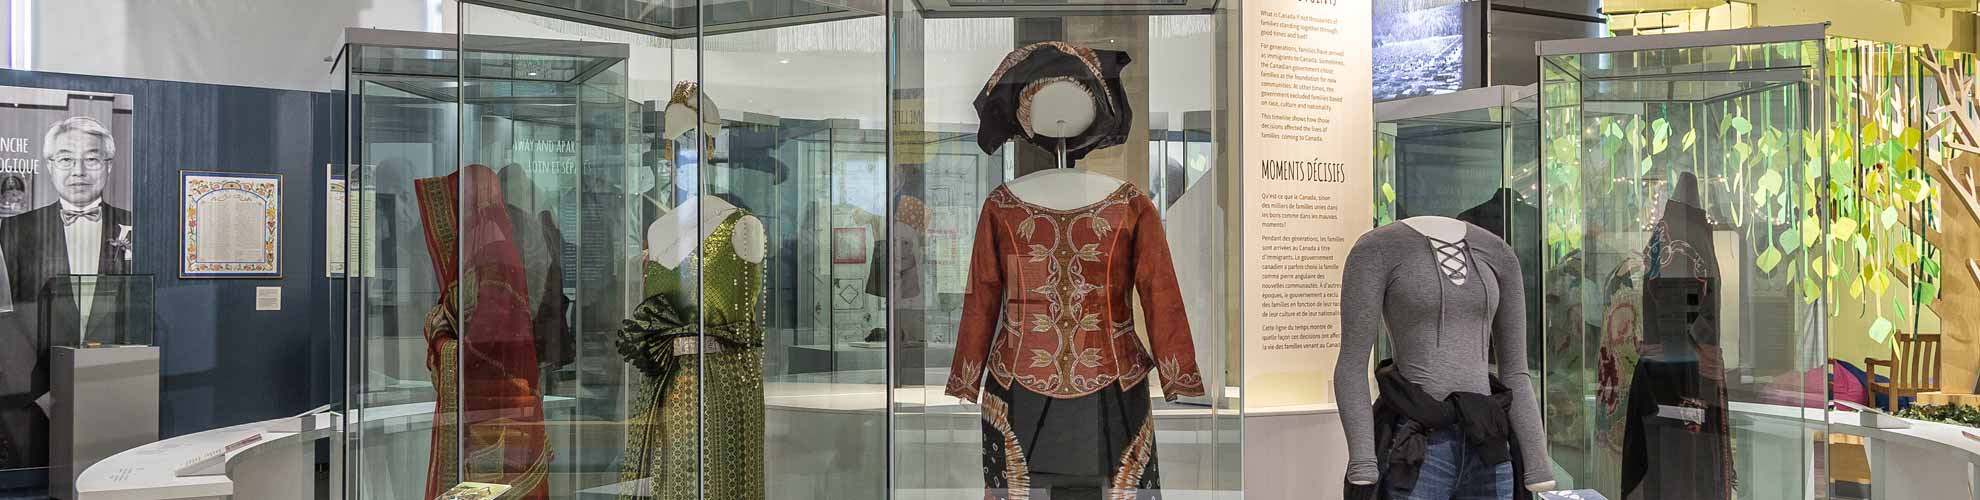 An image of the exhibition featuring mannequins with different clothes in a large glass case.